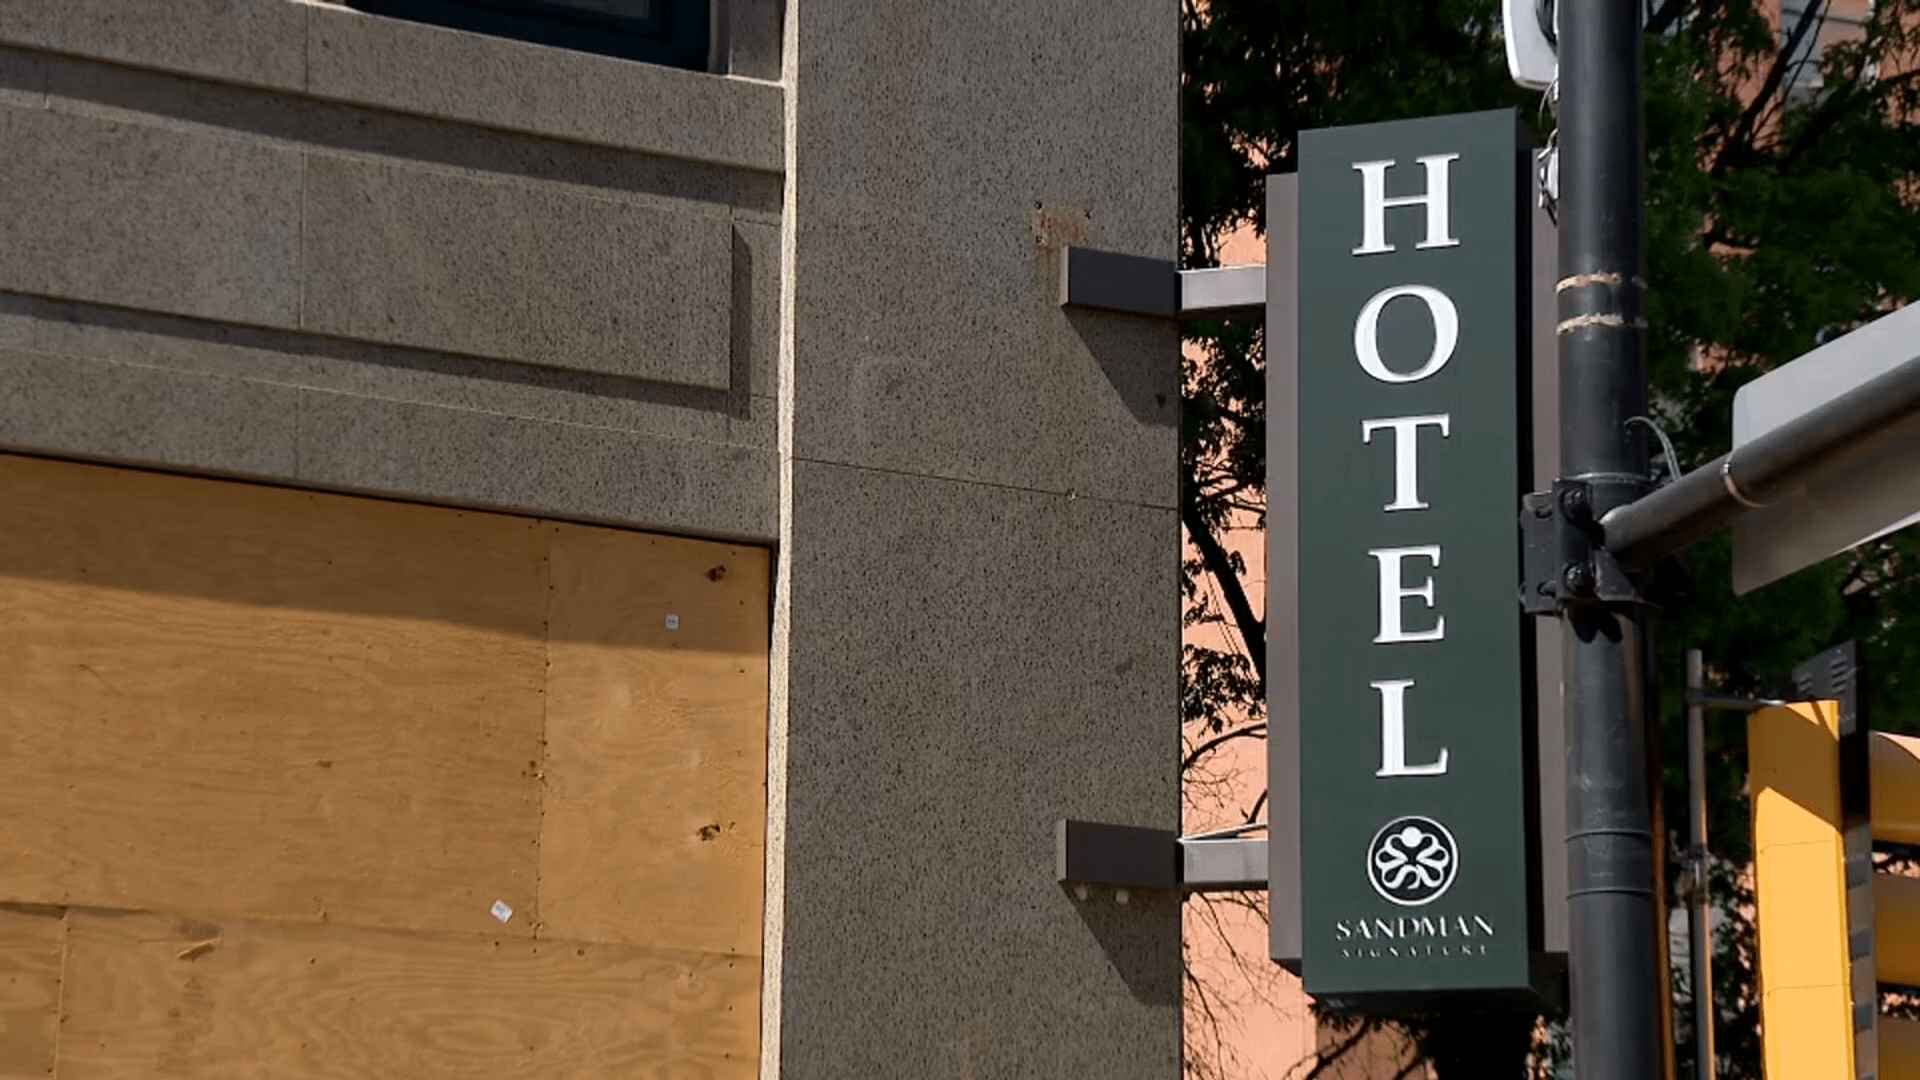 City of Fort Worth relief fund looks to help businesses impacted by
Sandman Hotel explosion